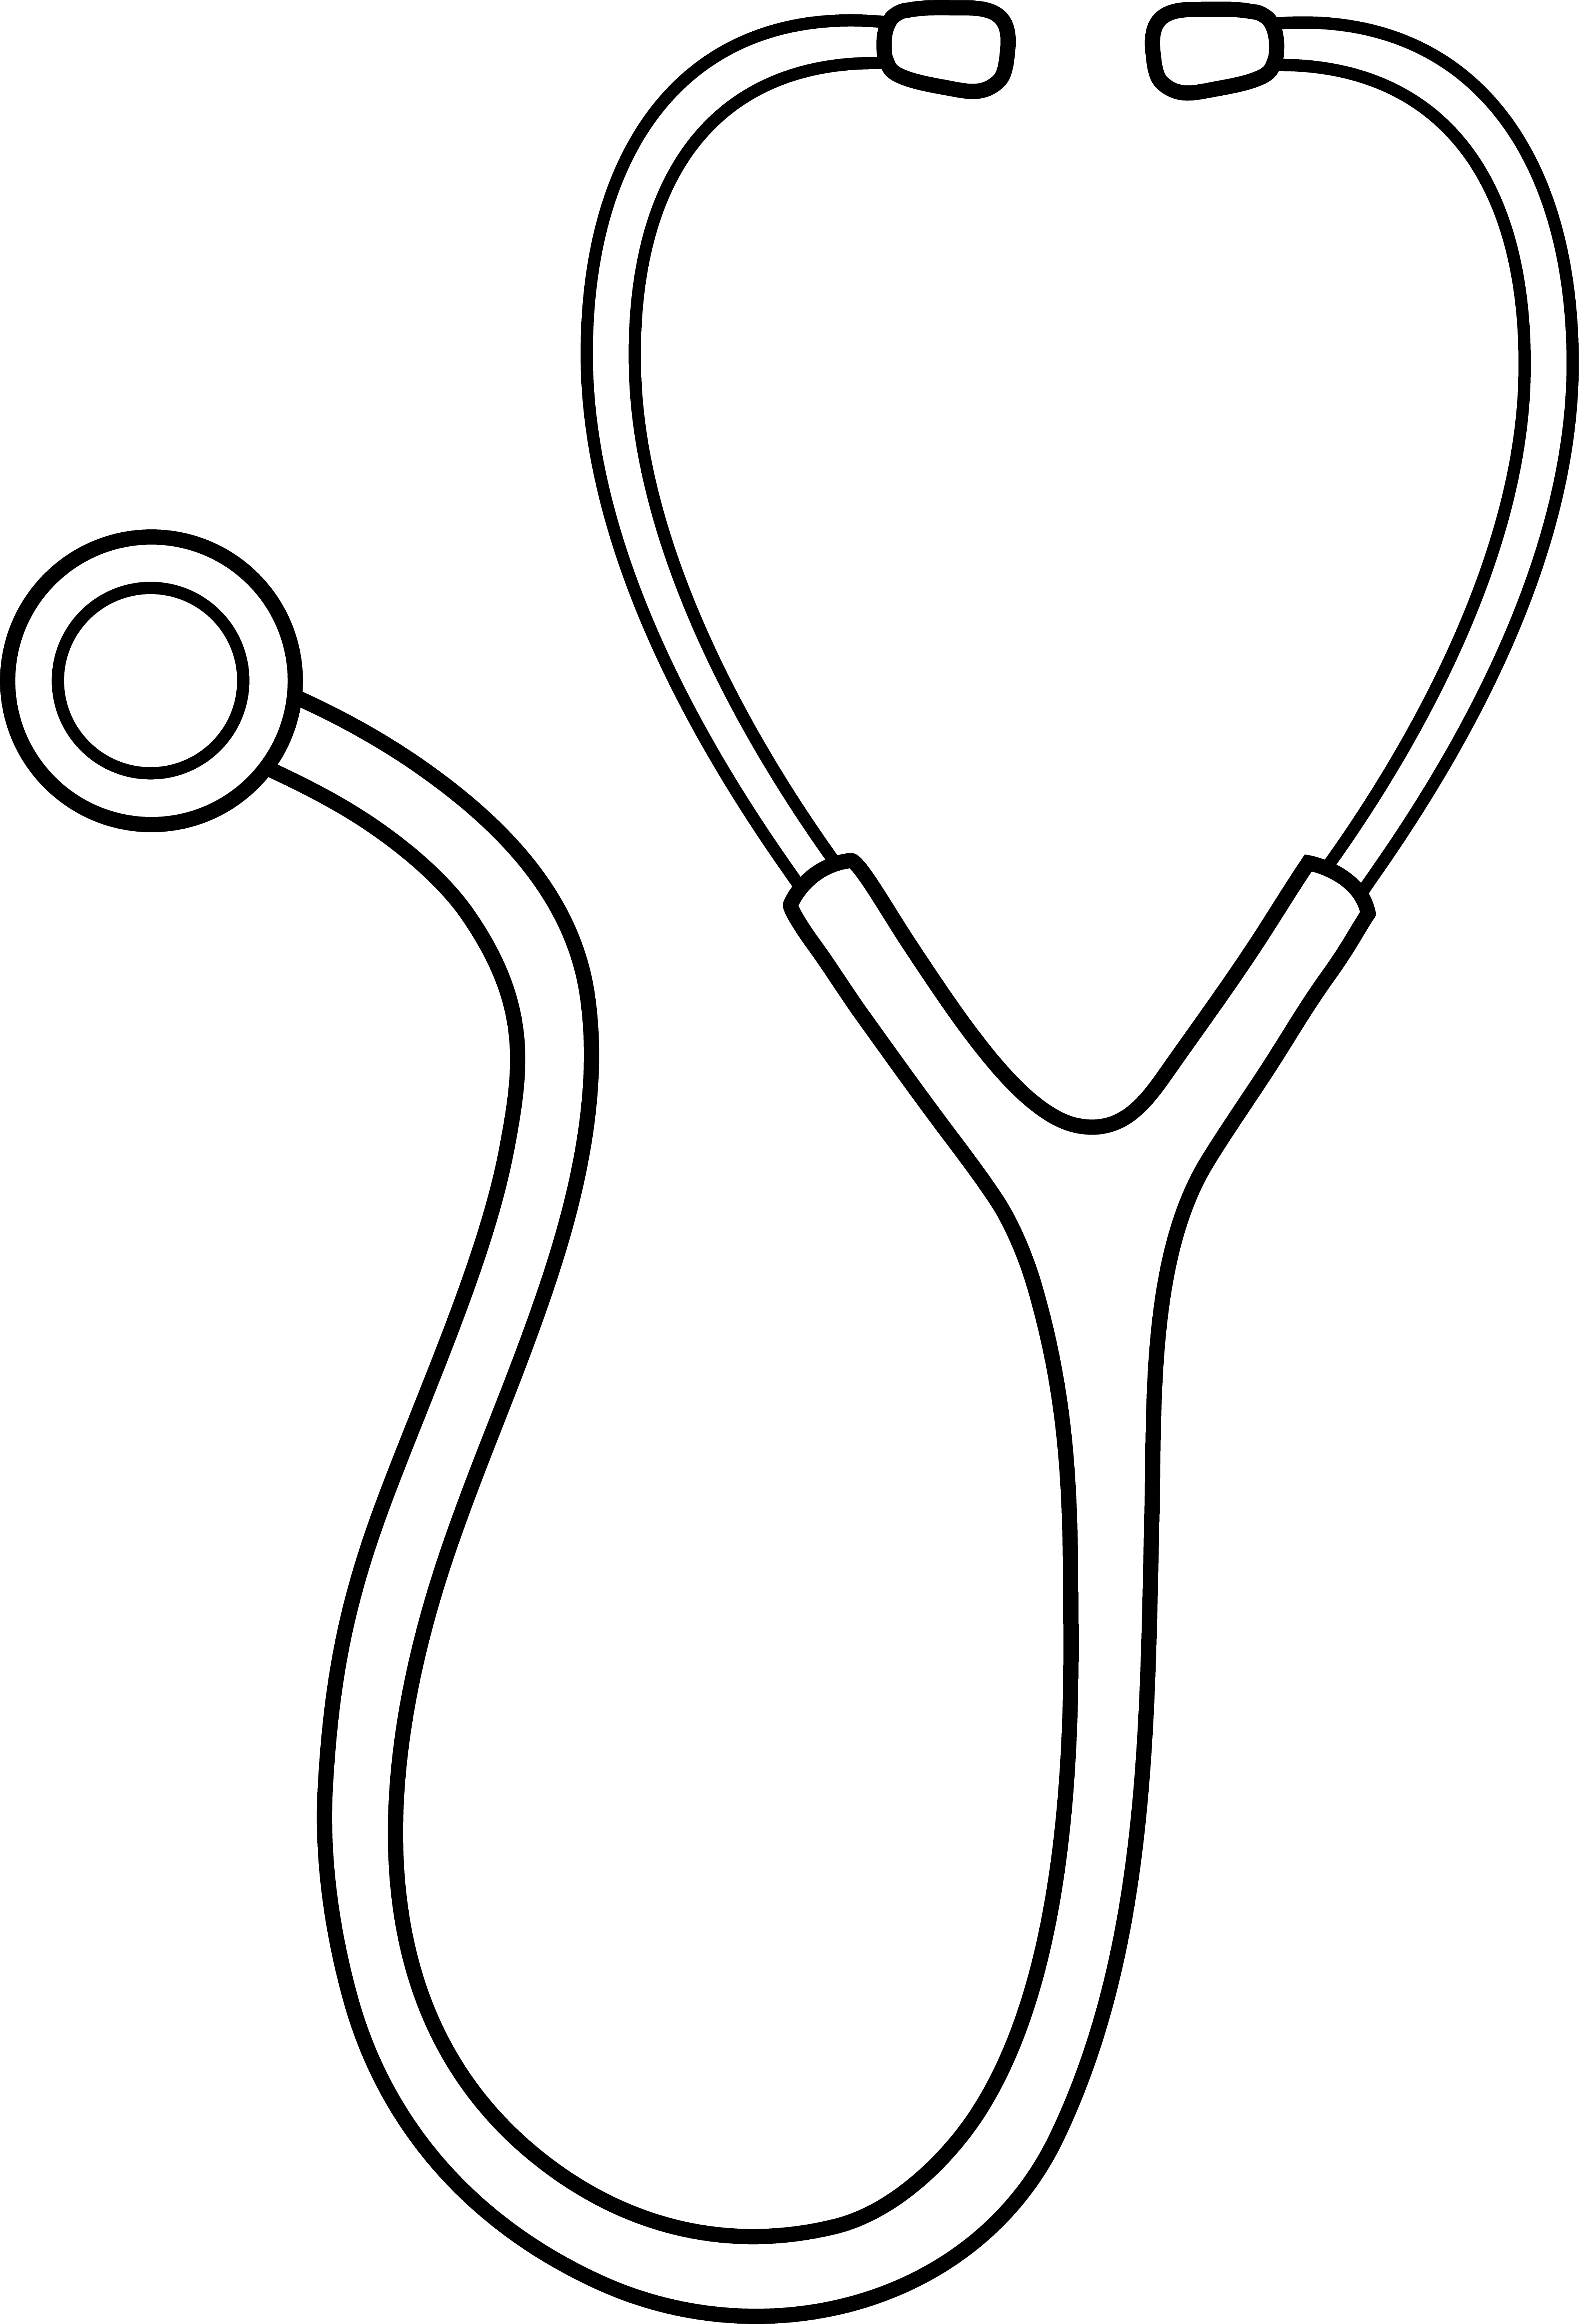 Clipart of stethoscope